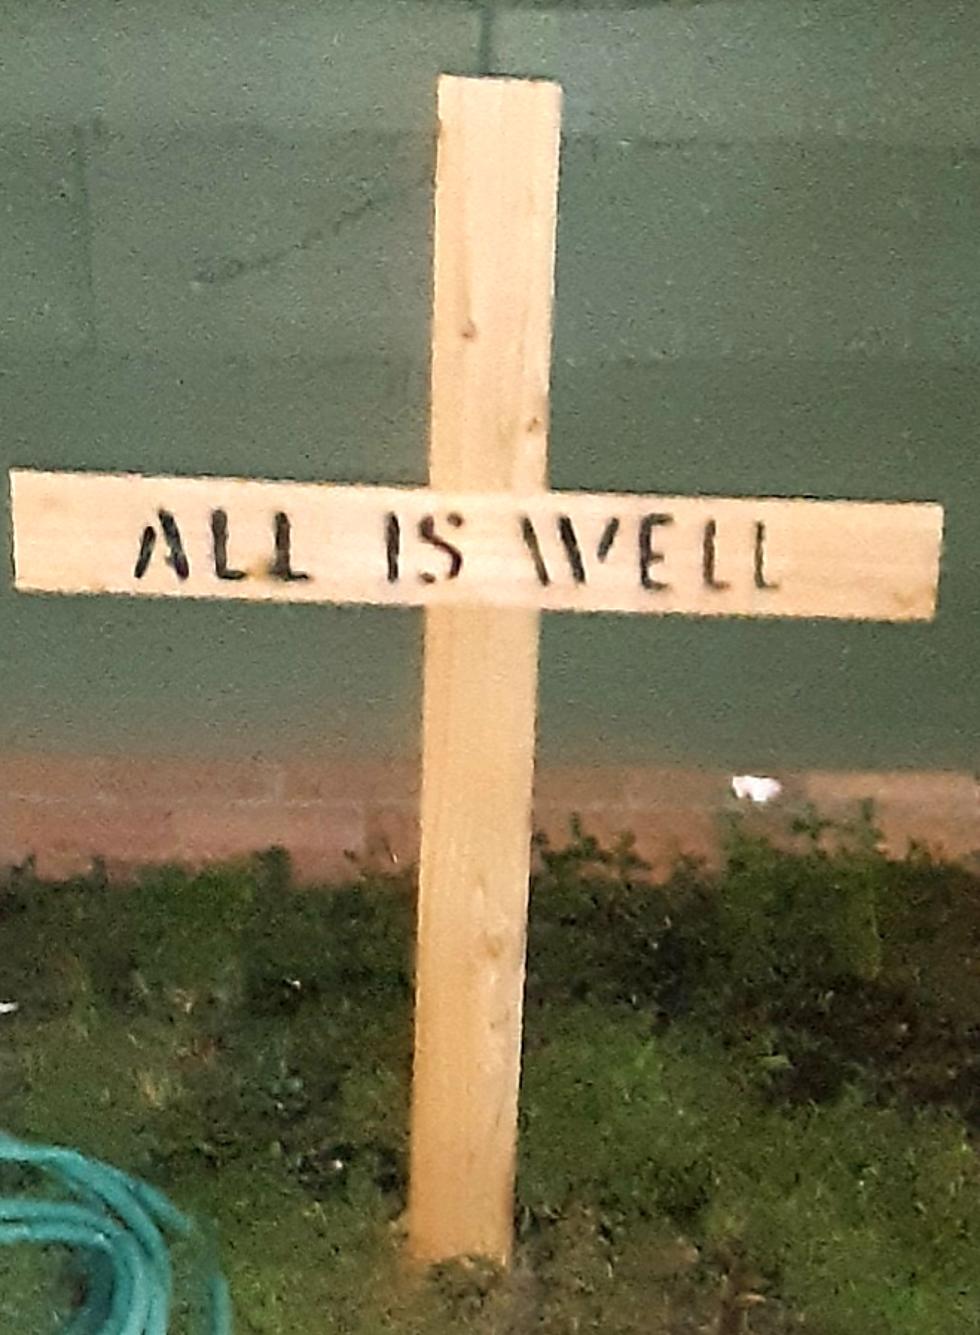 Local Salon Giving Away Free “All Is Well” Crosses